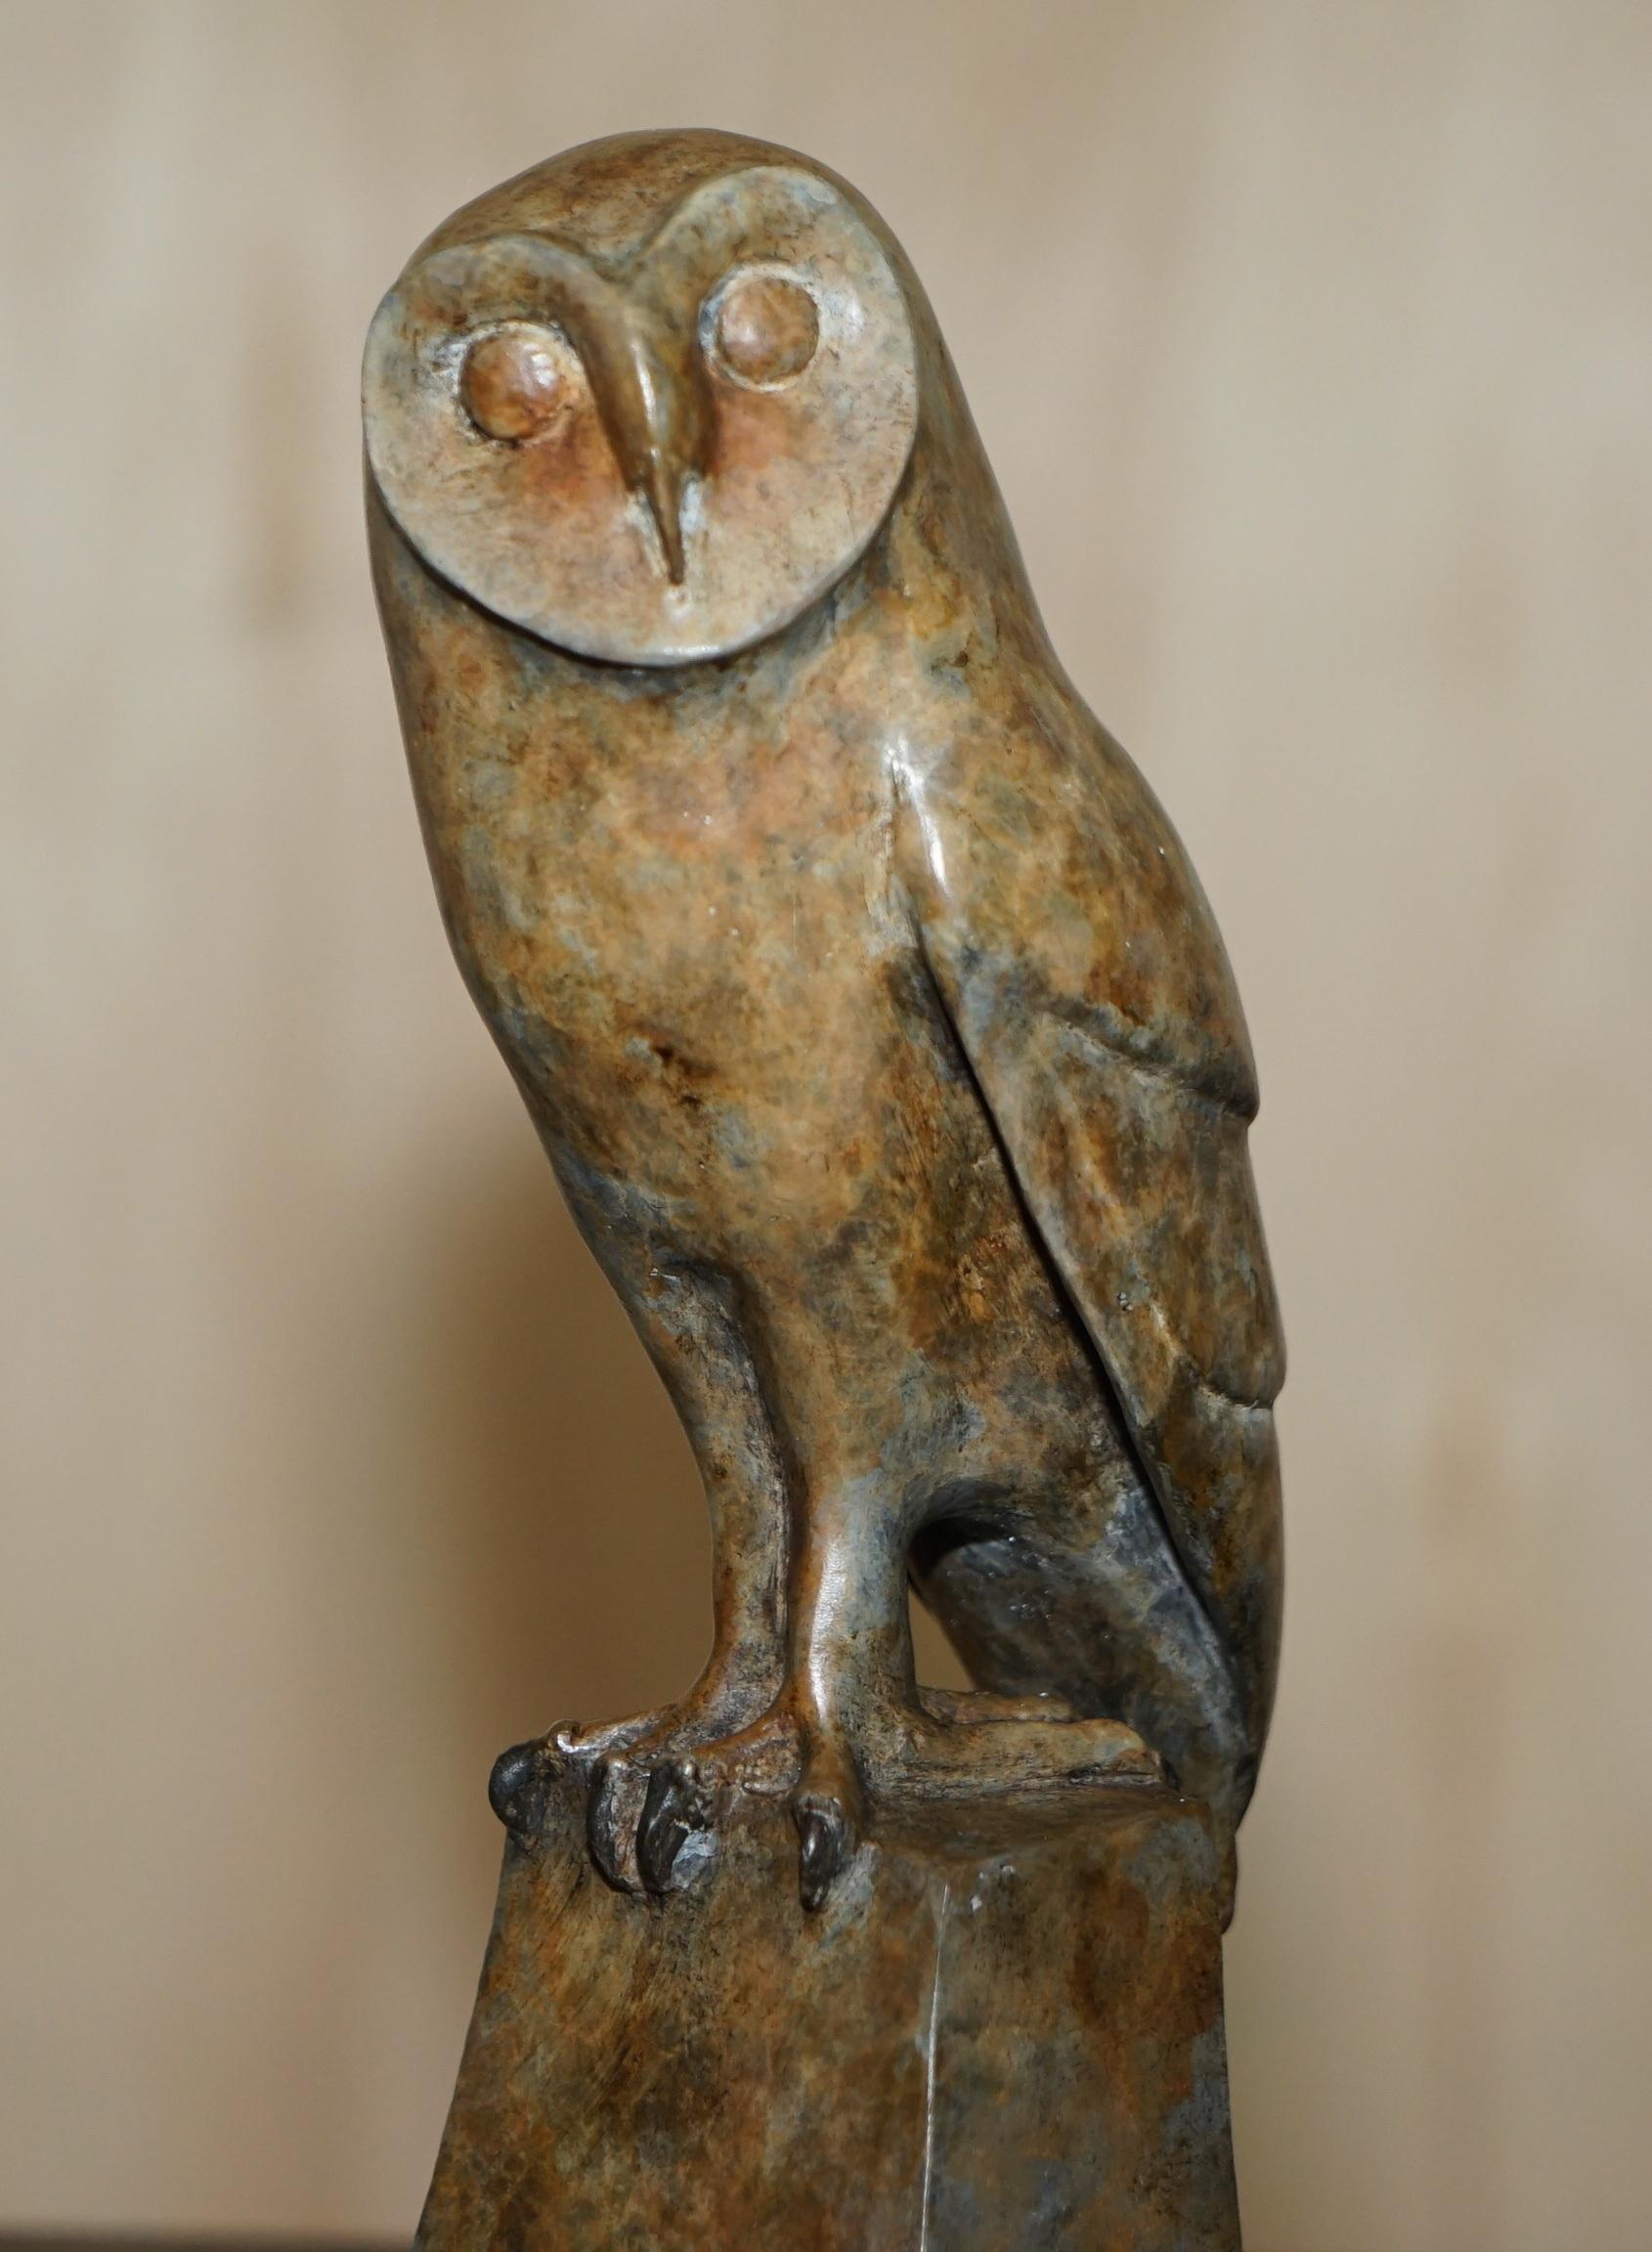 We are delighted to offer for sale this stunning limited edition 1/25 Alan Biggs signed statue of an Owl.

A very decorative and well made piece, the finished so smooth and tactile, I absolutely love it and don’t really want to let it go. It is in